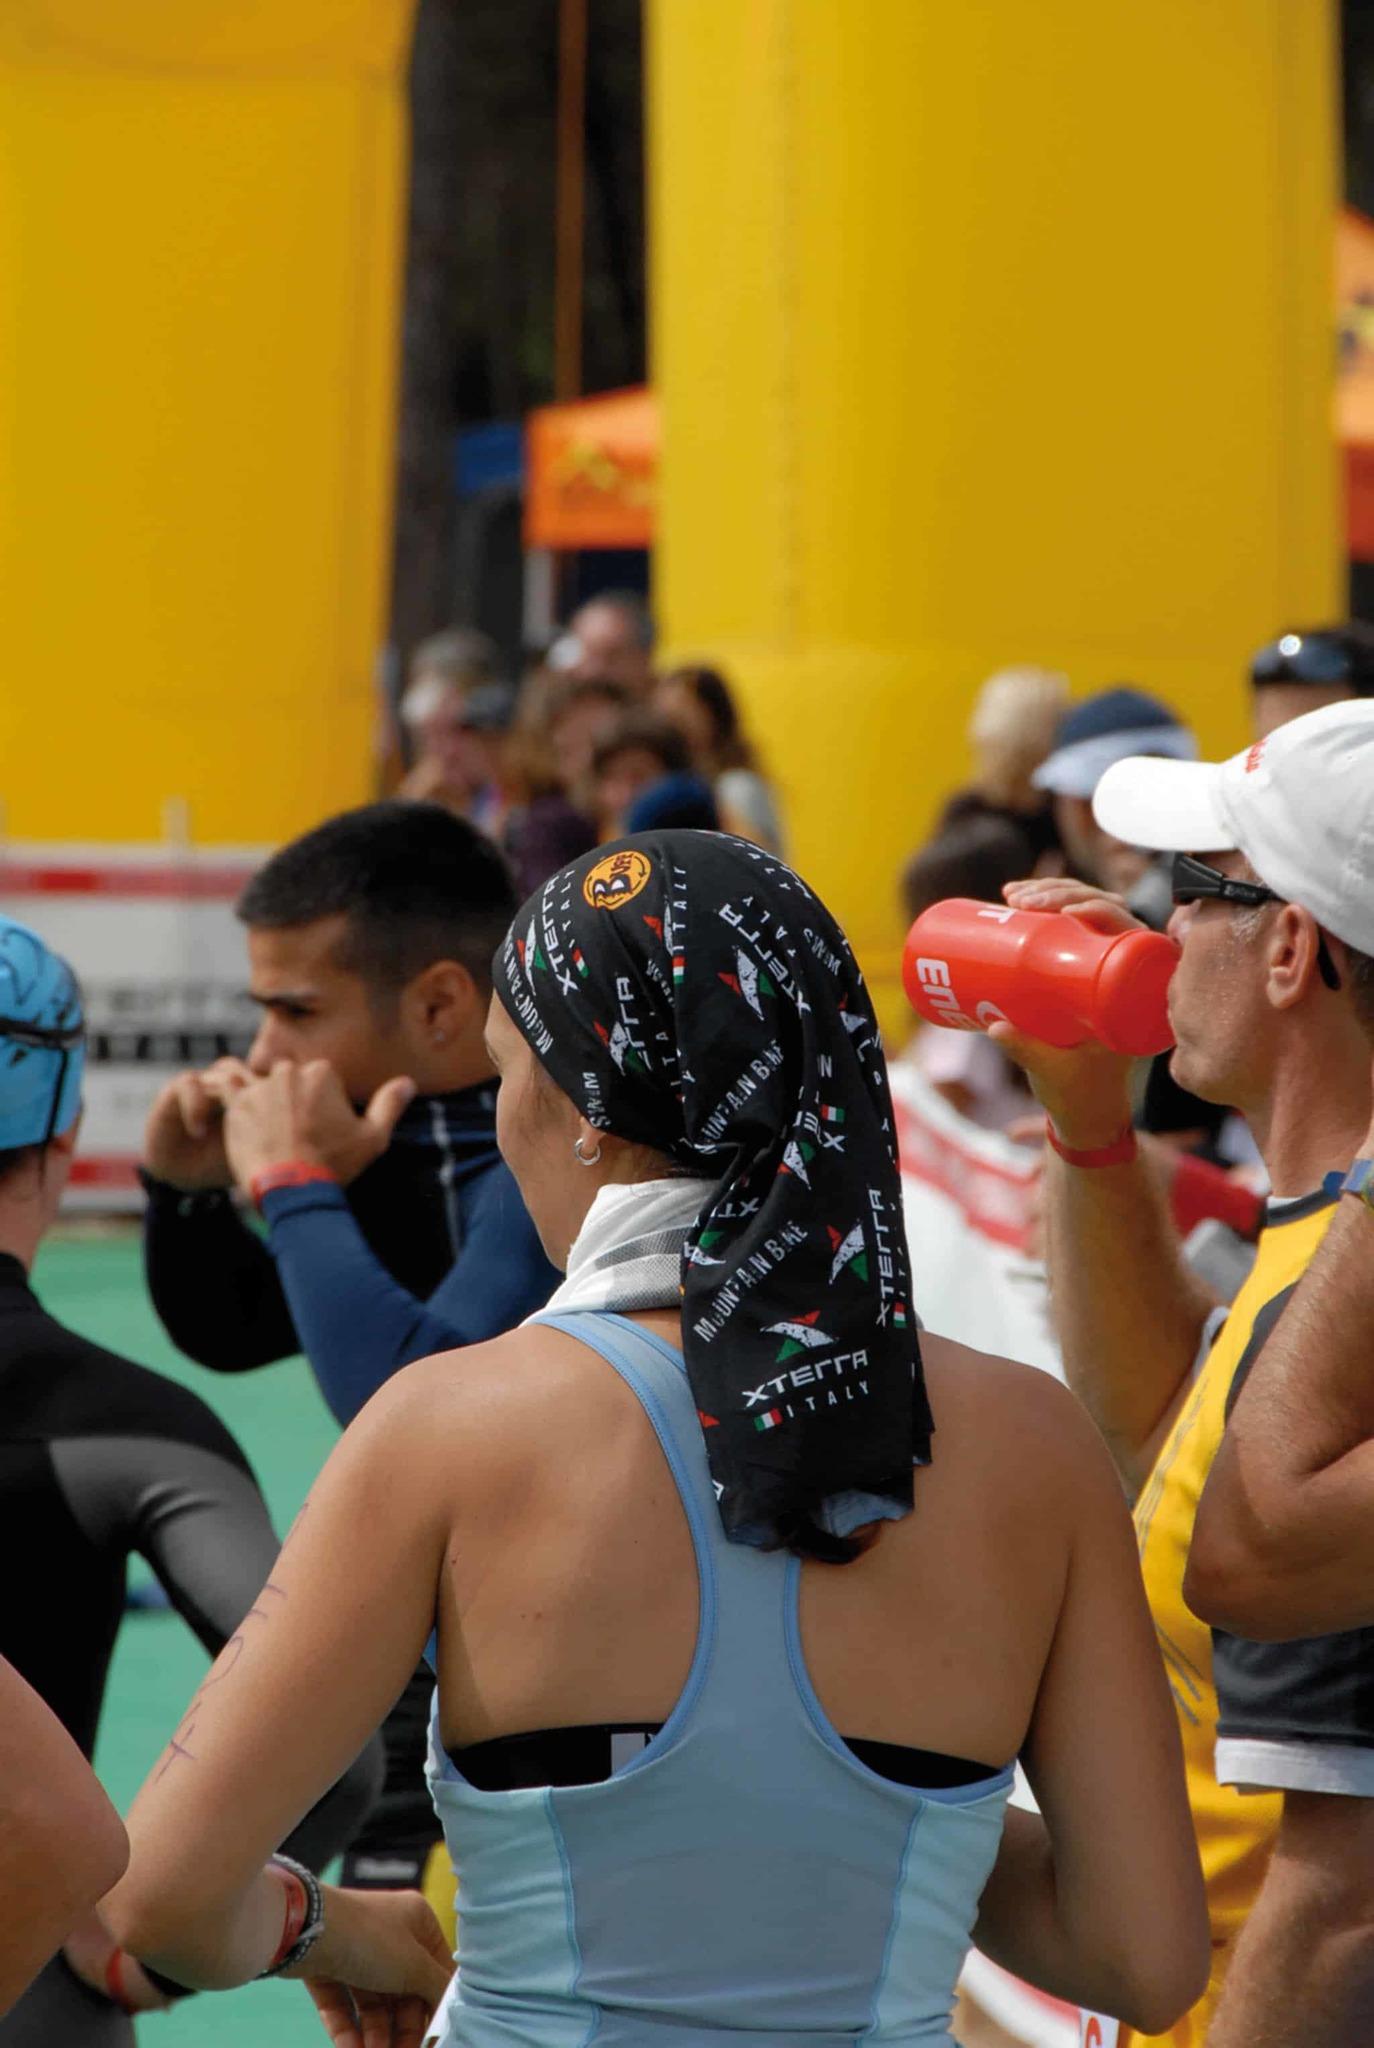 A back portrait shot of a woman standing in a triathlon race crowd. She is wearing a High UV Buff® as hair cover. This is a way to tame and dry your wet hair after the swim. Source: buff.eu © distributed for the promotion of the High UV Buff® in running / triathlon